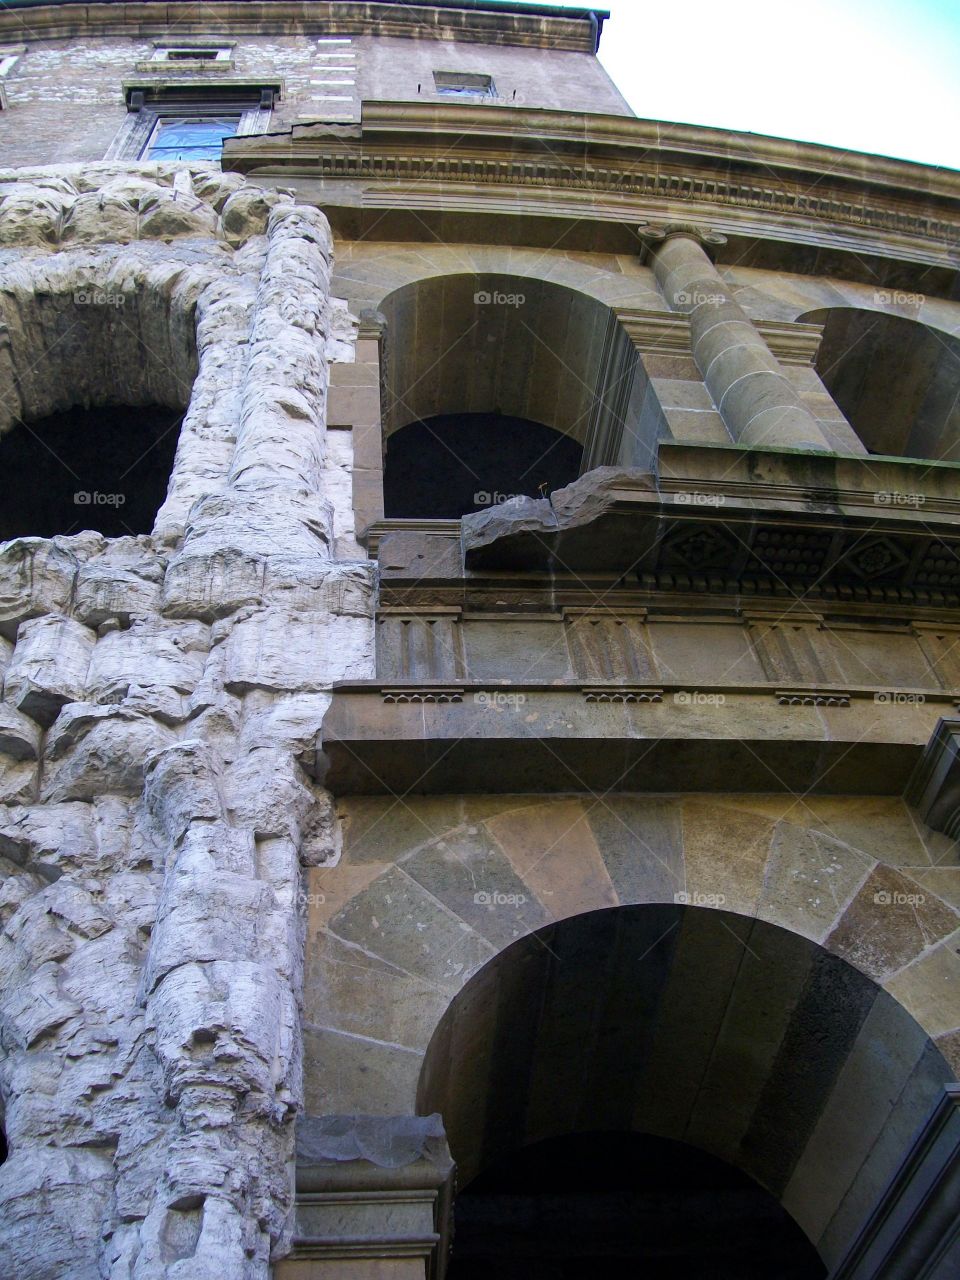 A close up of uncovered ancient ruins side by side with the modern reconstruction of the arches